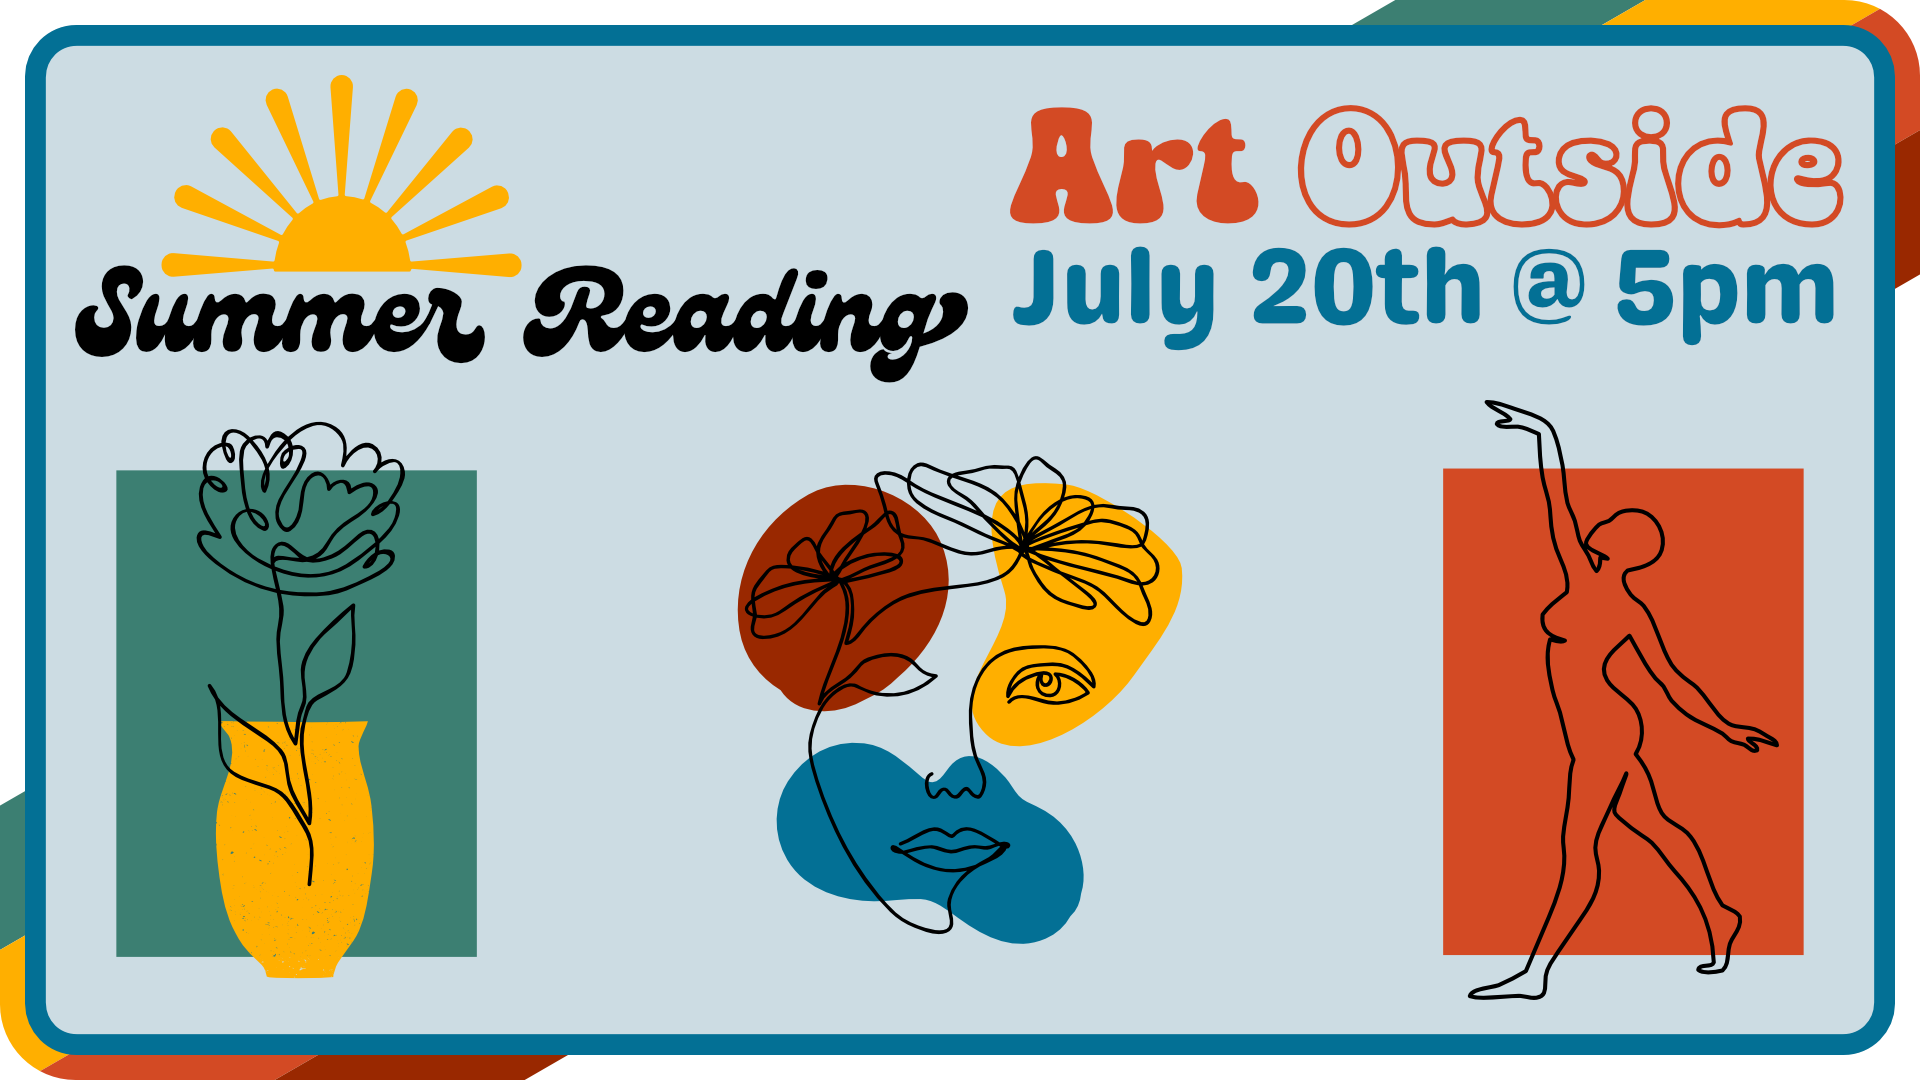 Summer Reading Art Outside, July 20th at 5pm